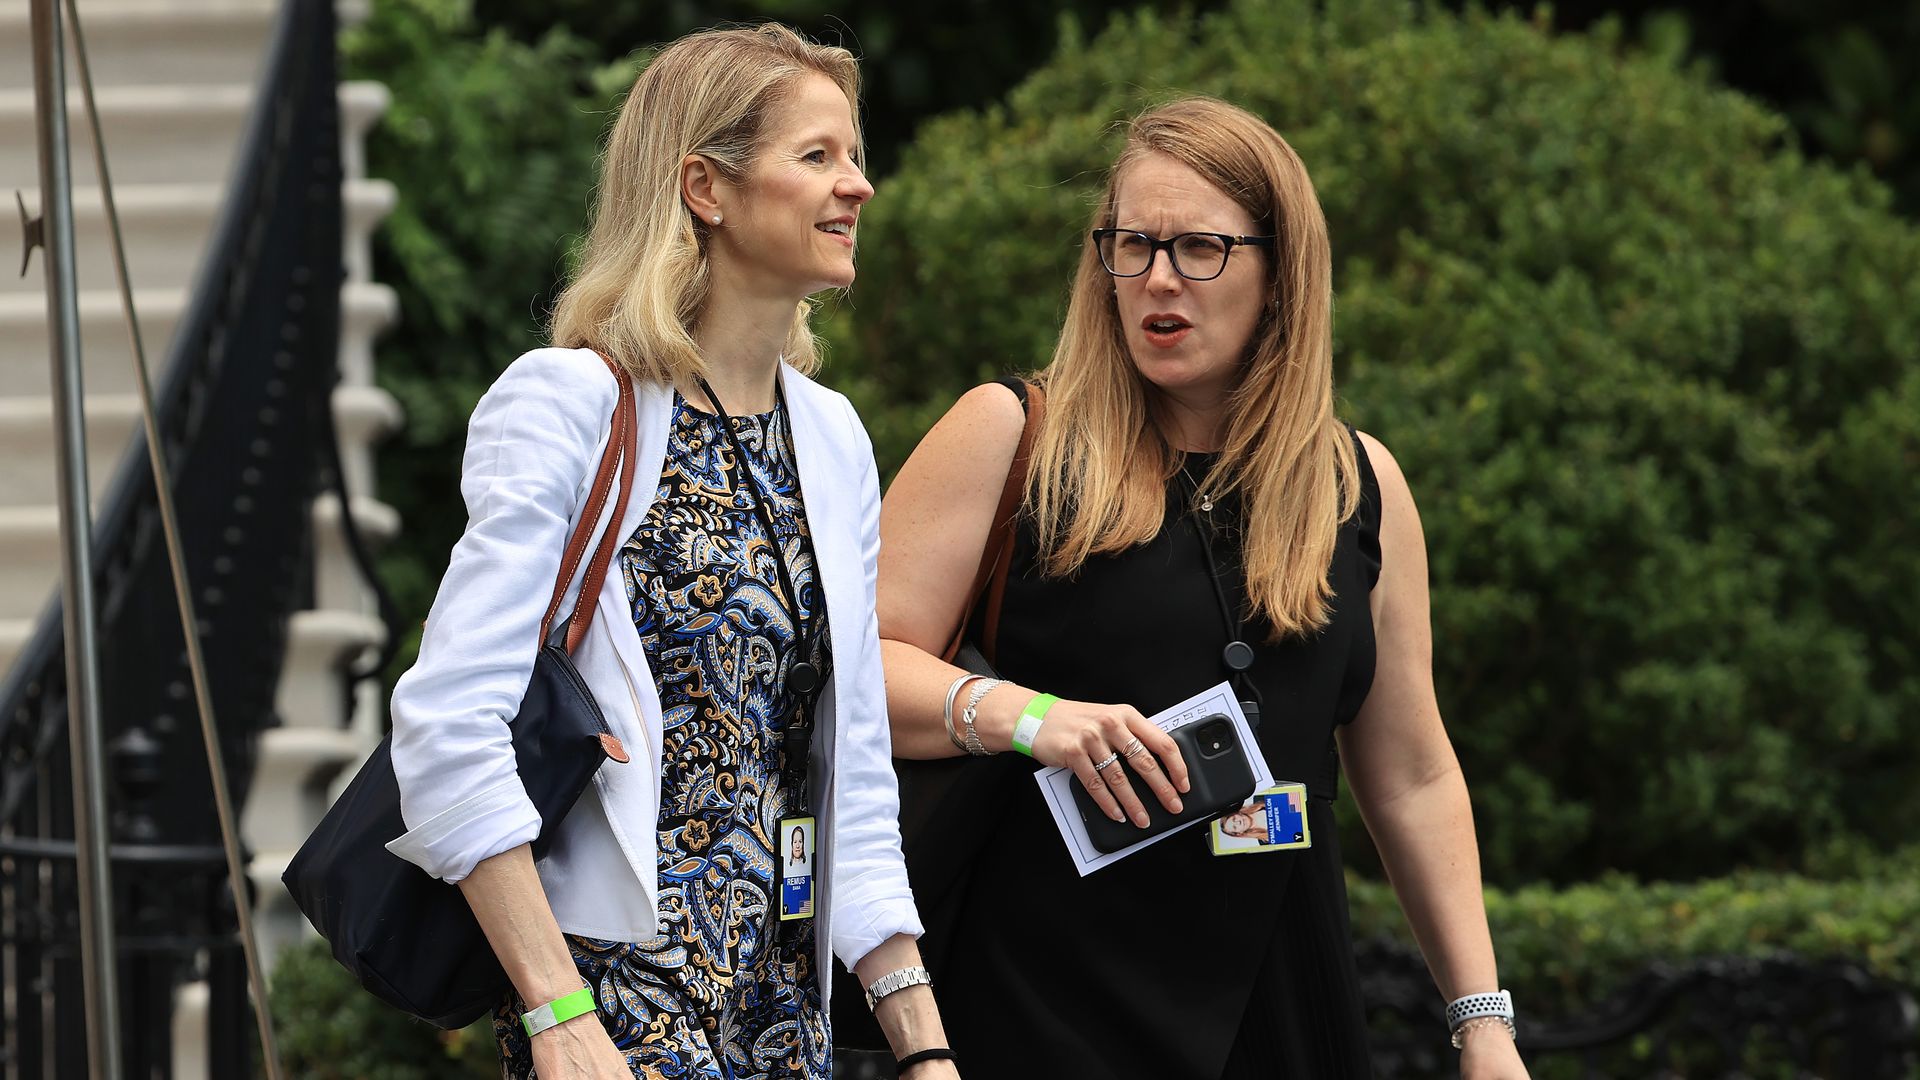 White House Deputy Chief of Staff Jenn O'Malley Dillon is seen leaving the White House with counsel Dana Remus.